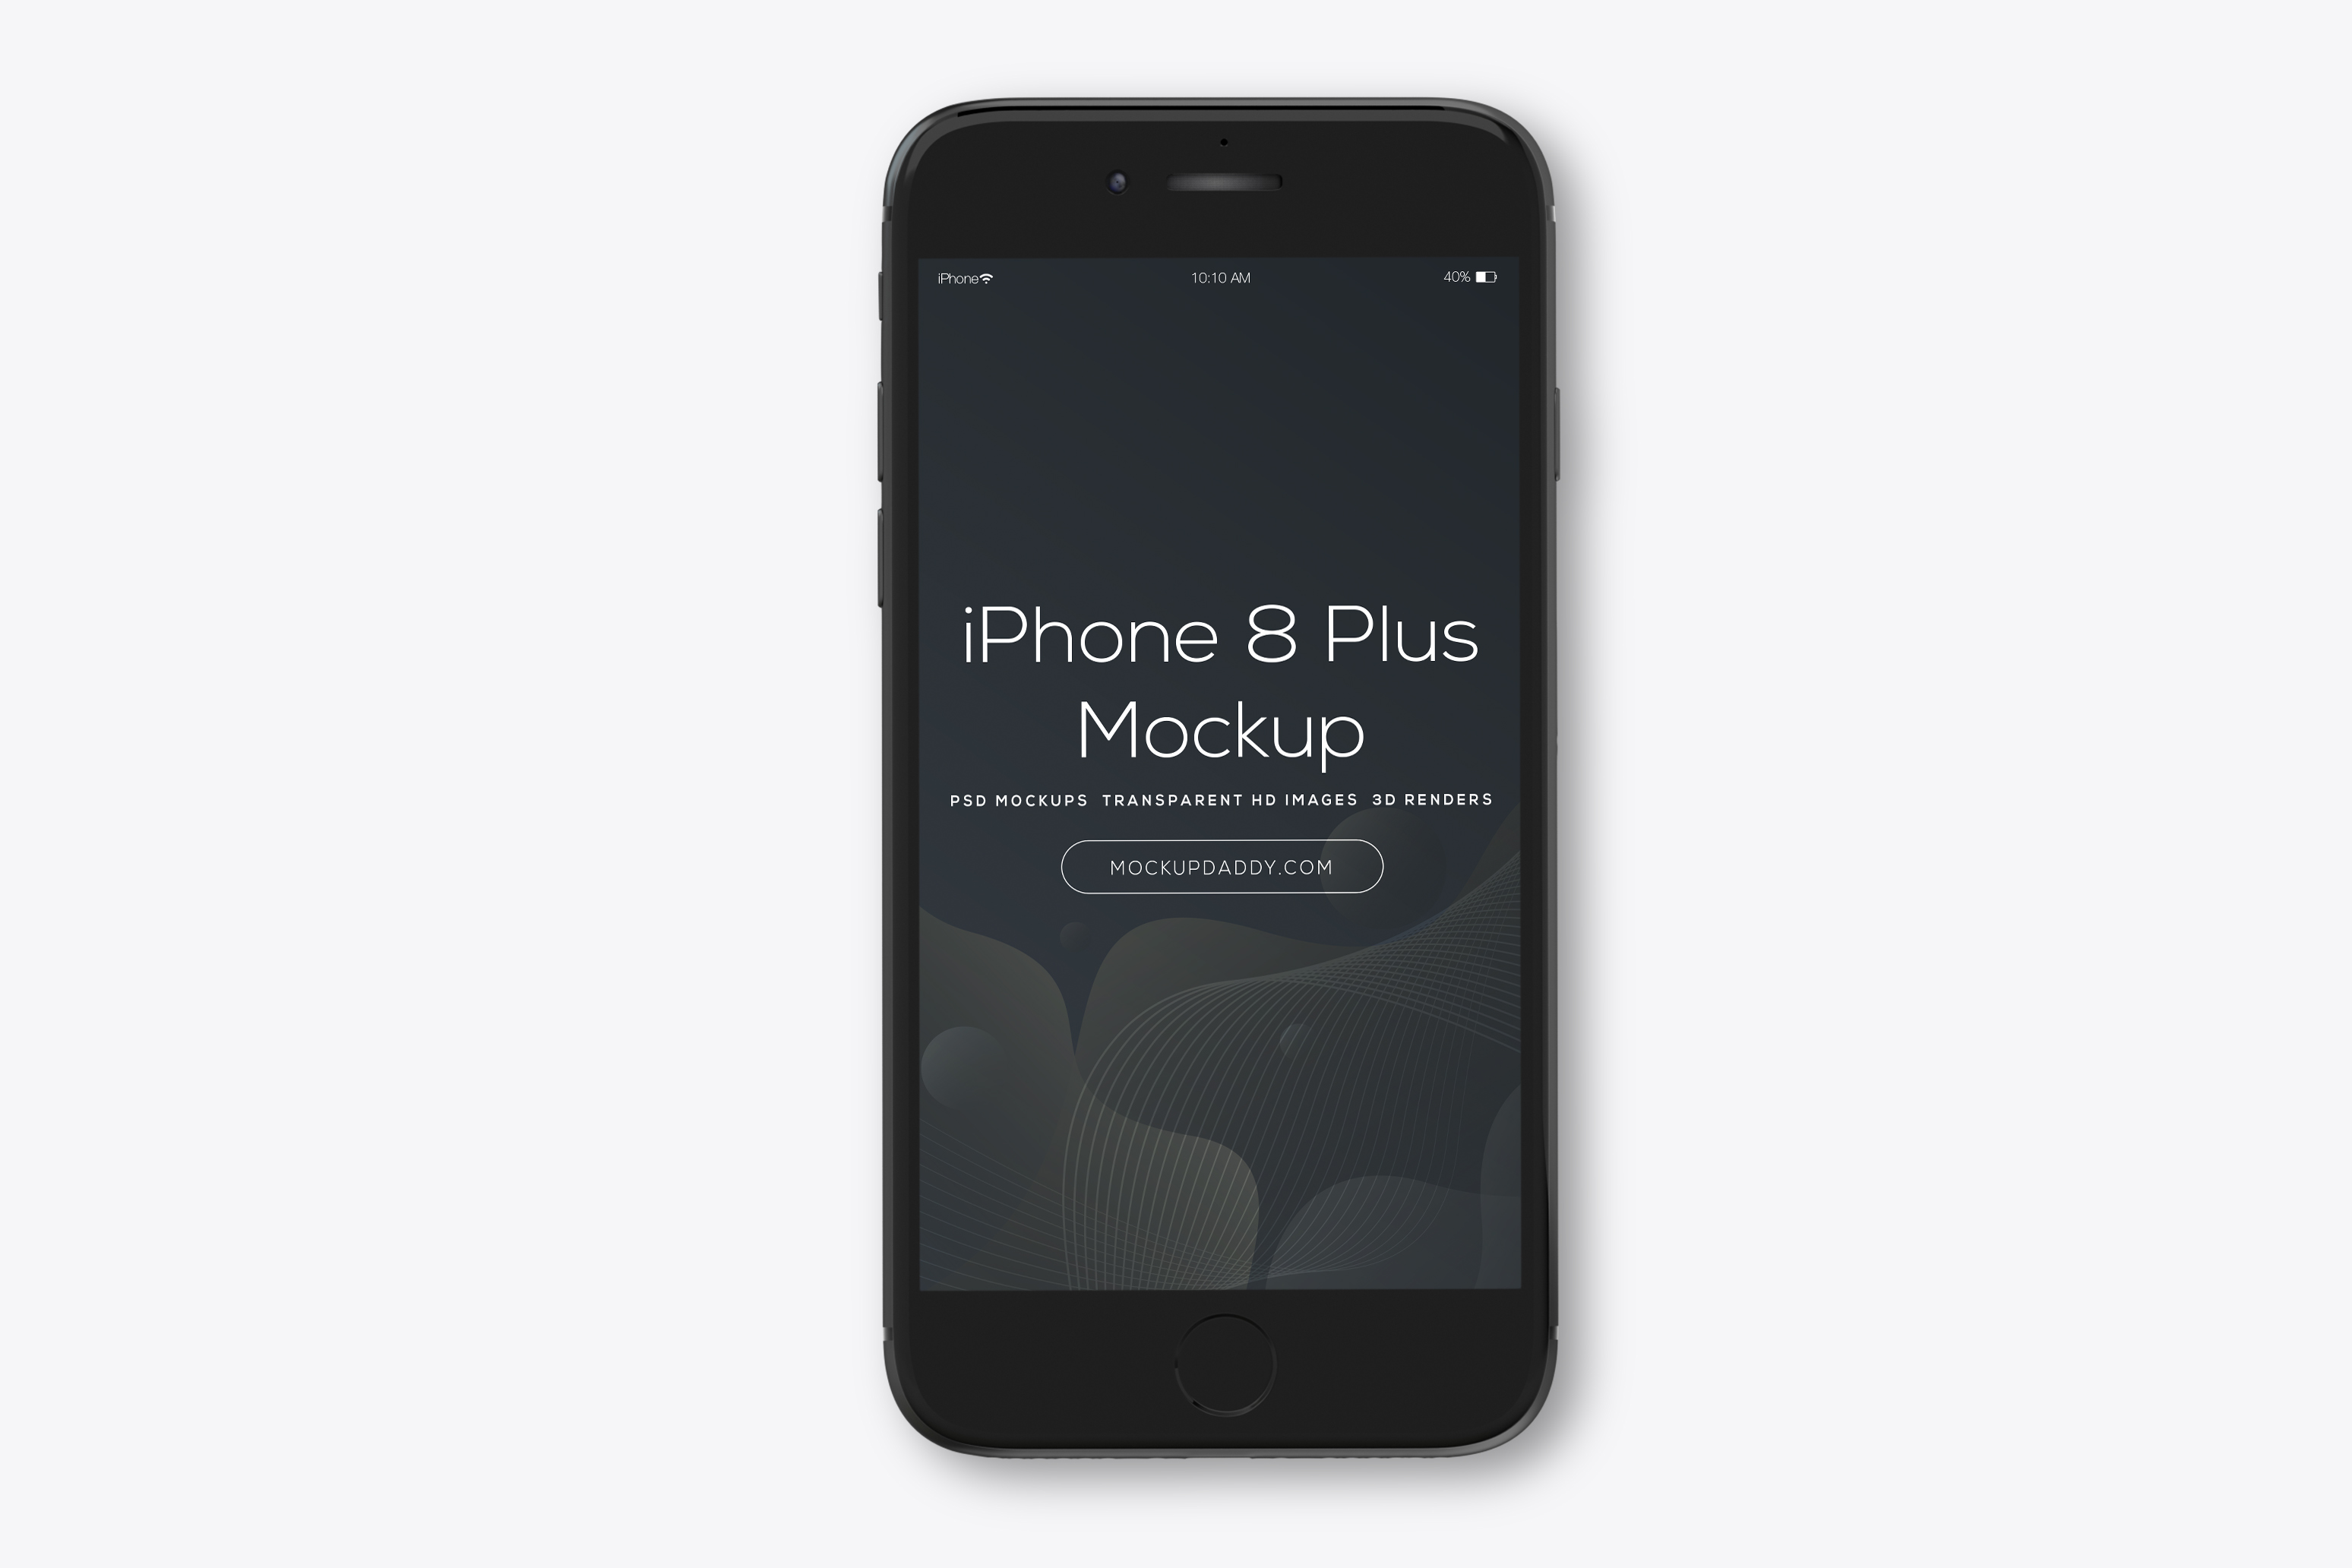 Download Iphone 8 Plus Mockup Psd Free - Free Vector Download 2020